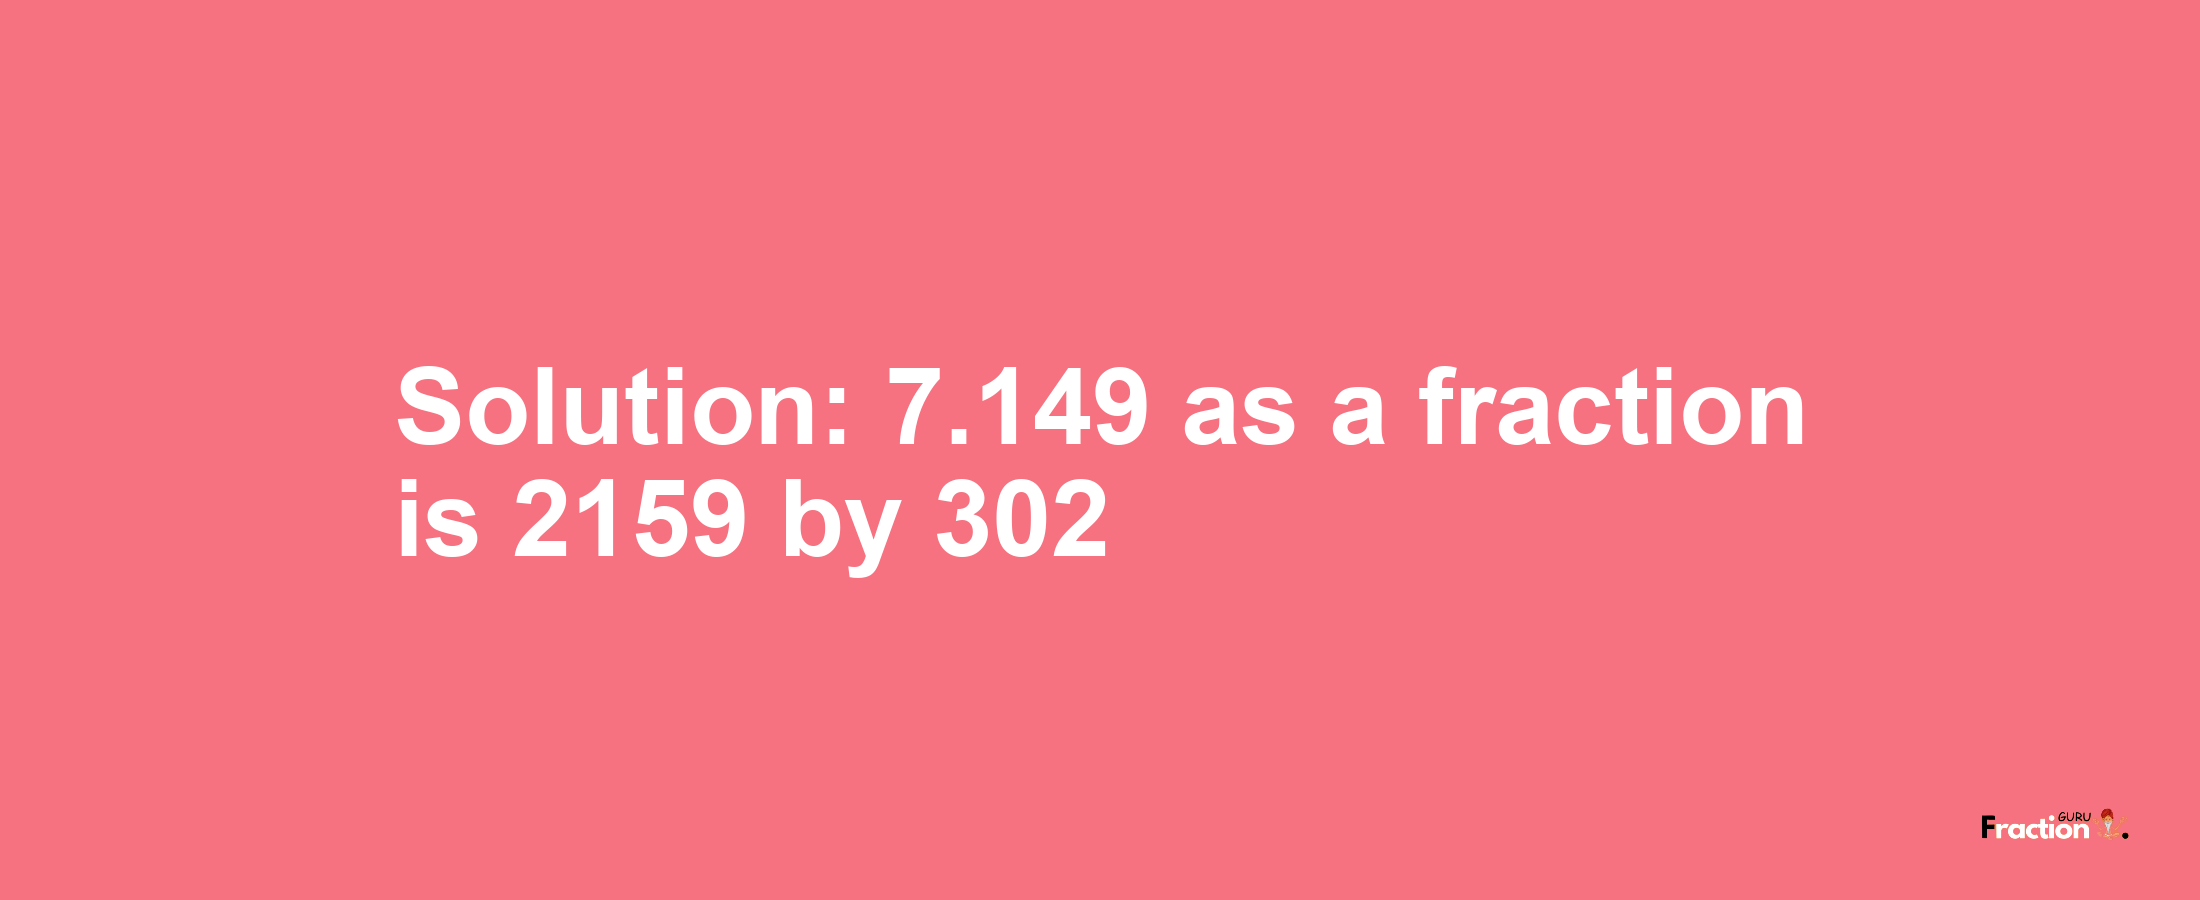 Solution:7.149 as a fraction is 2159/302